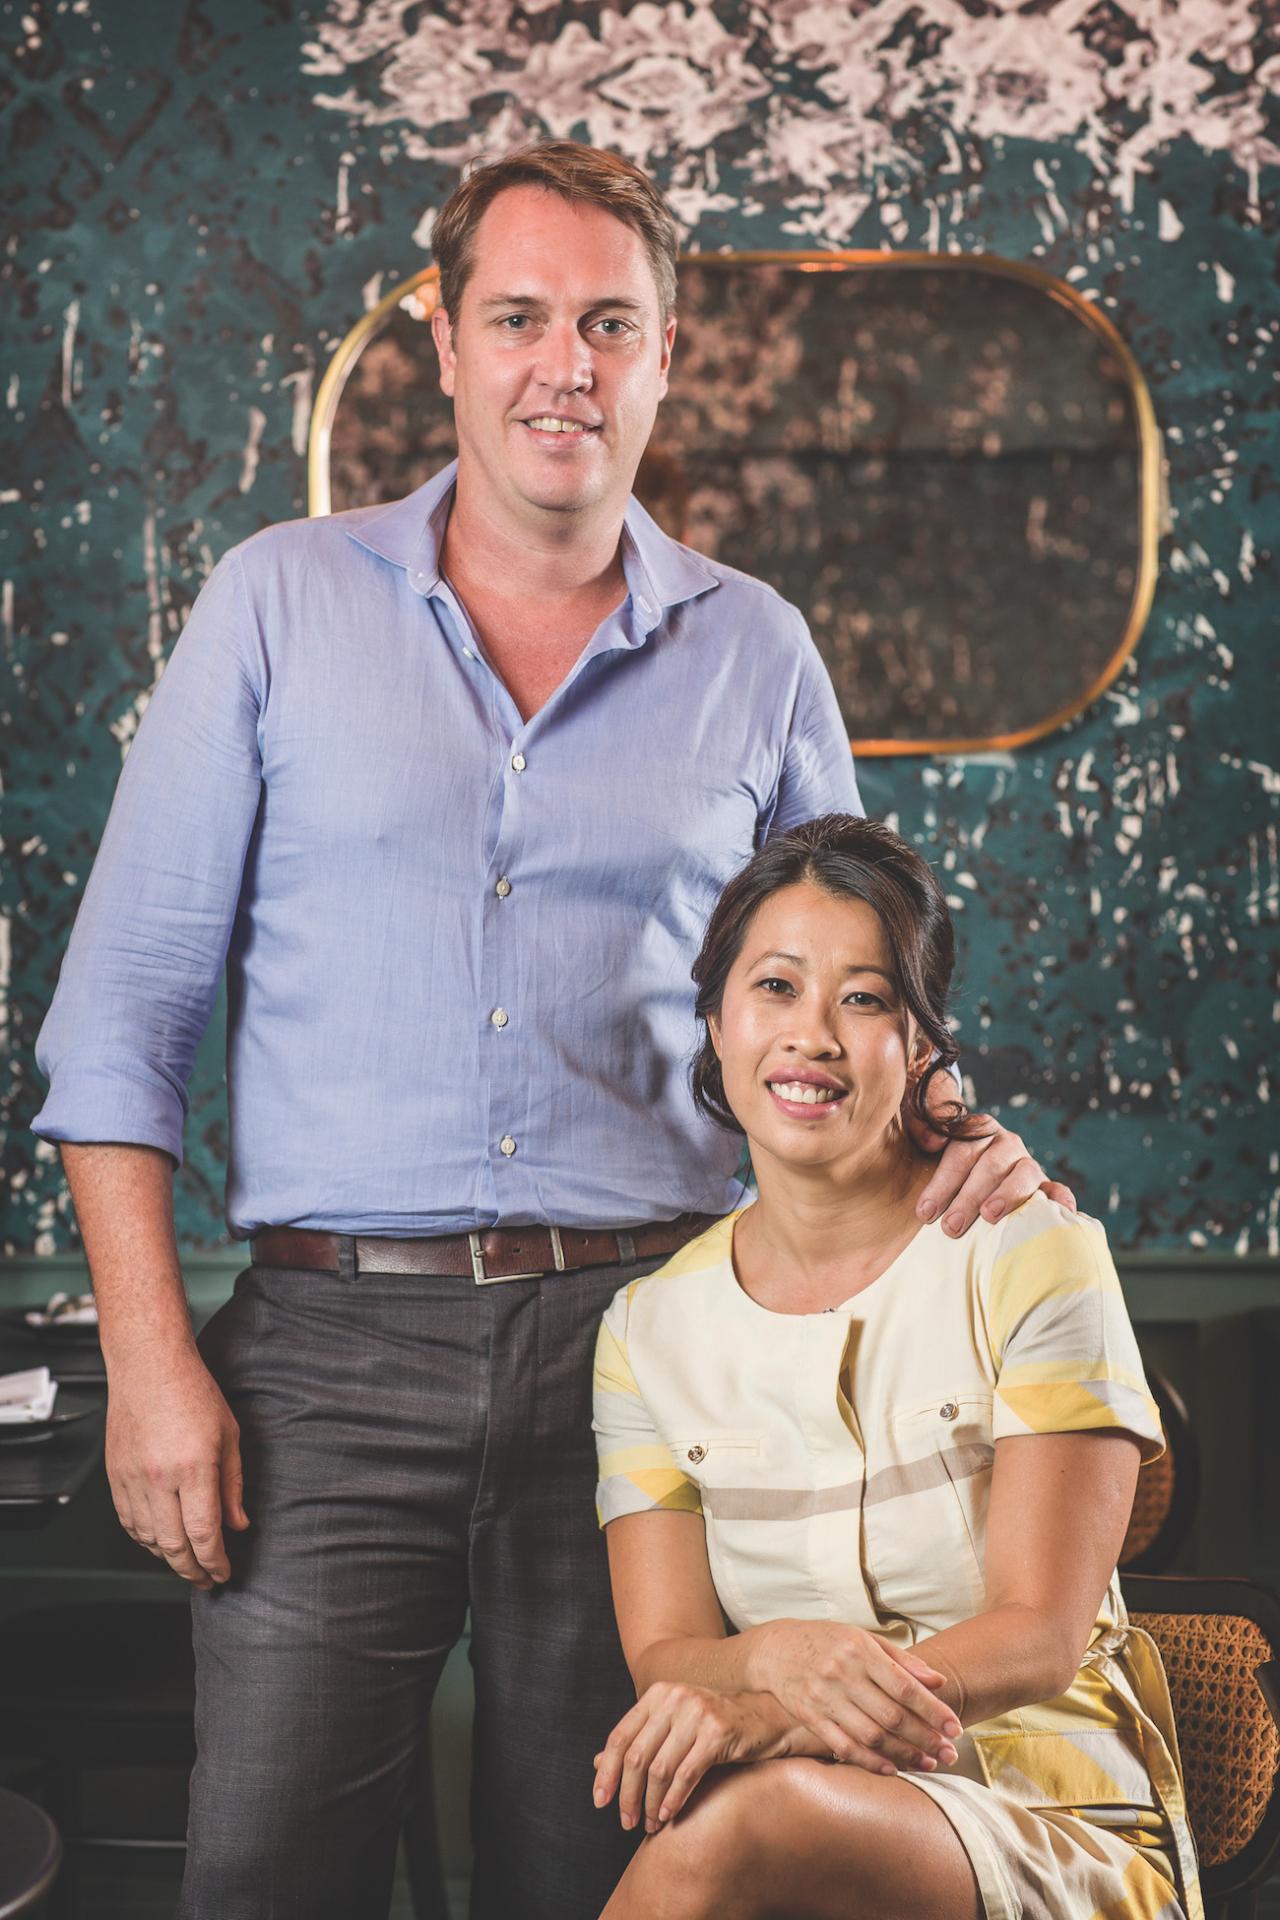 Dynamic Duo: Meet The Husband-and-Wife Restaurateurs Behind Woolly Pig 